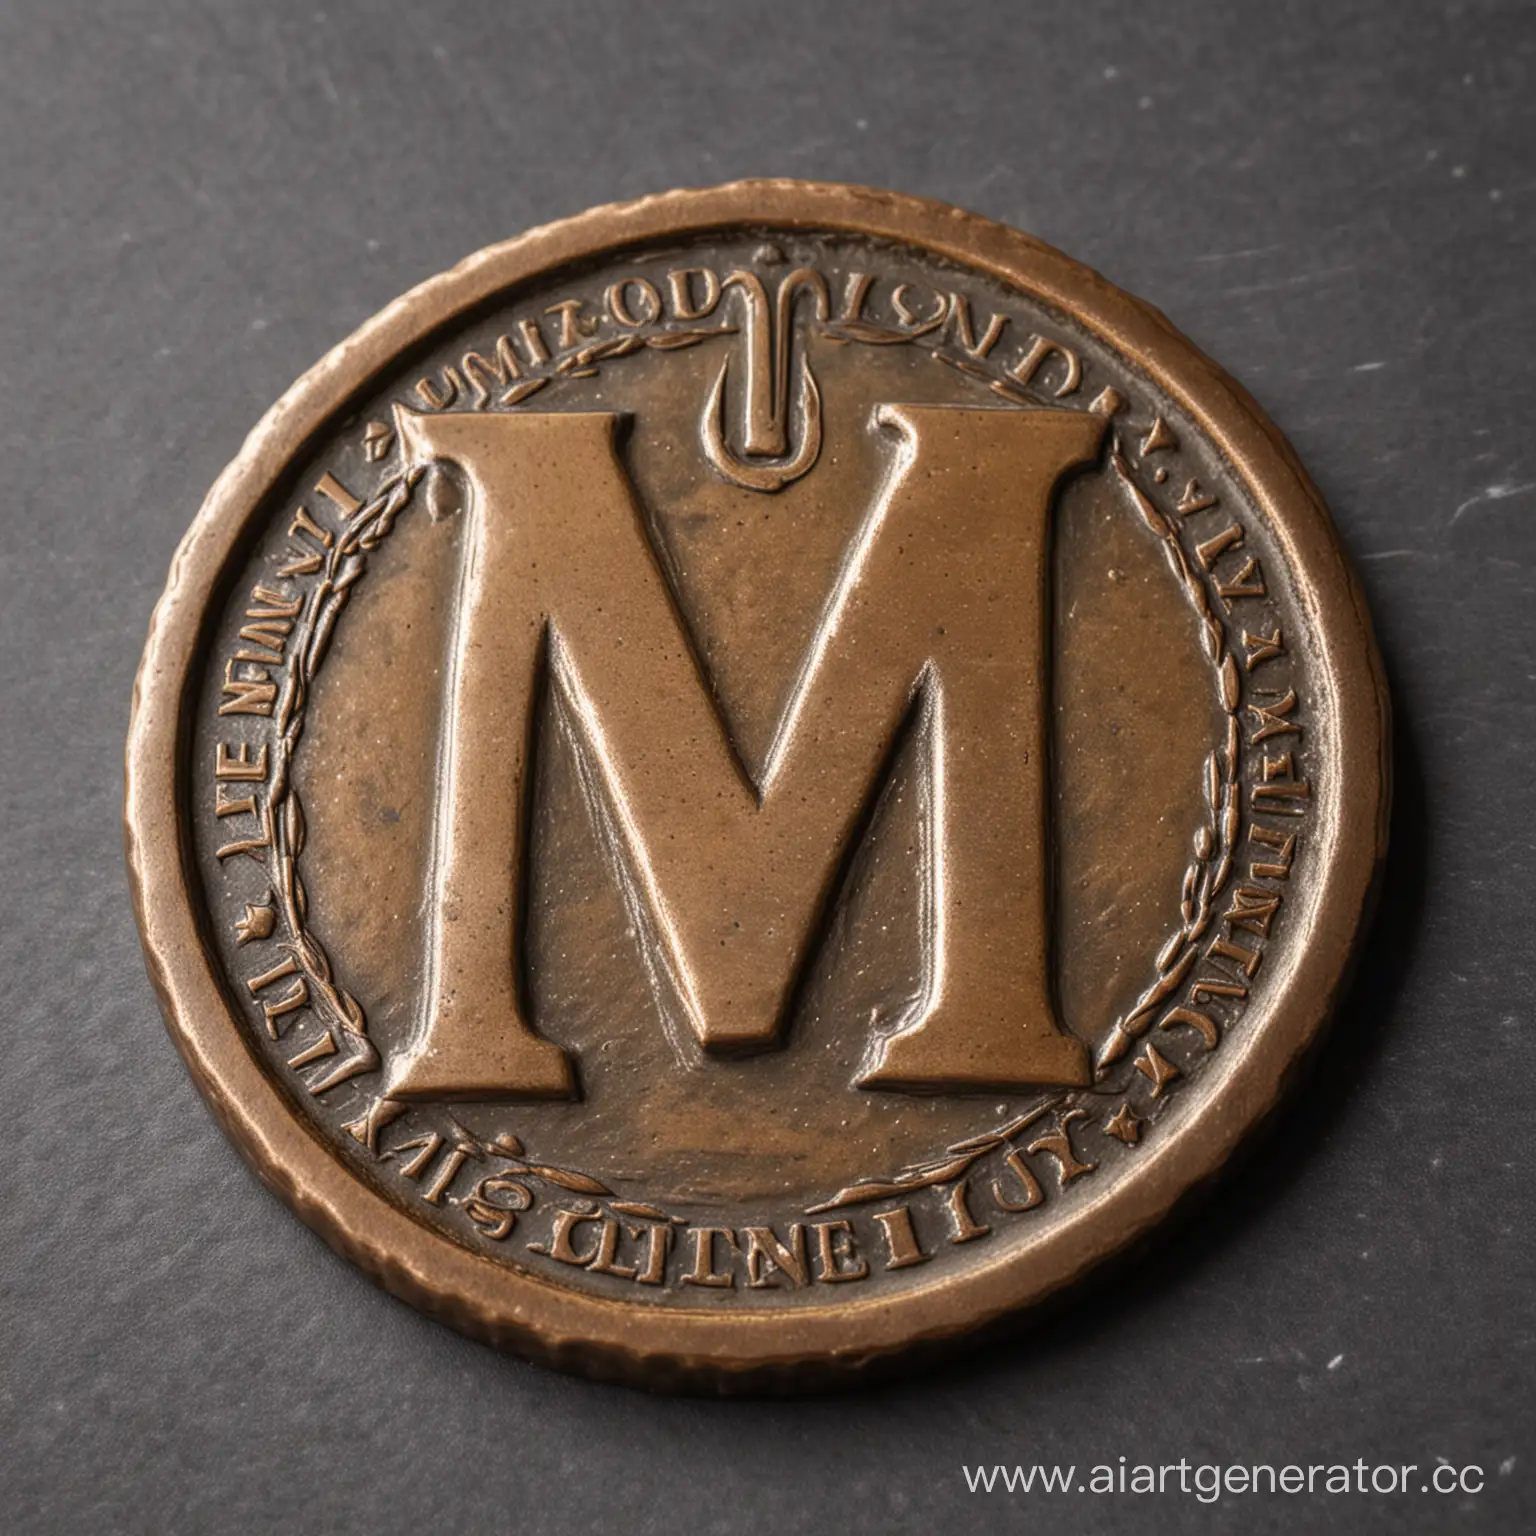 Bronze-Coin-with-Letter-M-Detailed-Frontal-View-Numismatic-Artifact